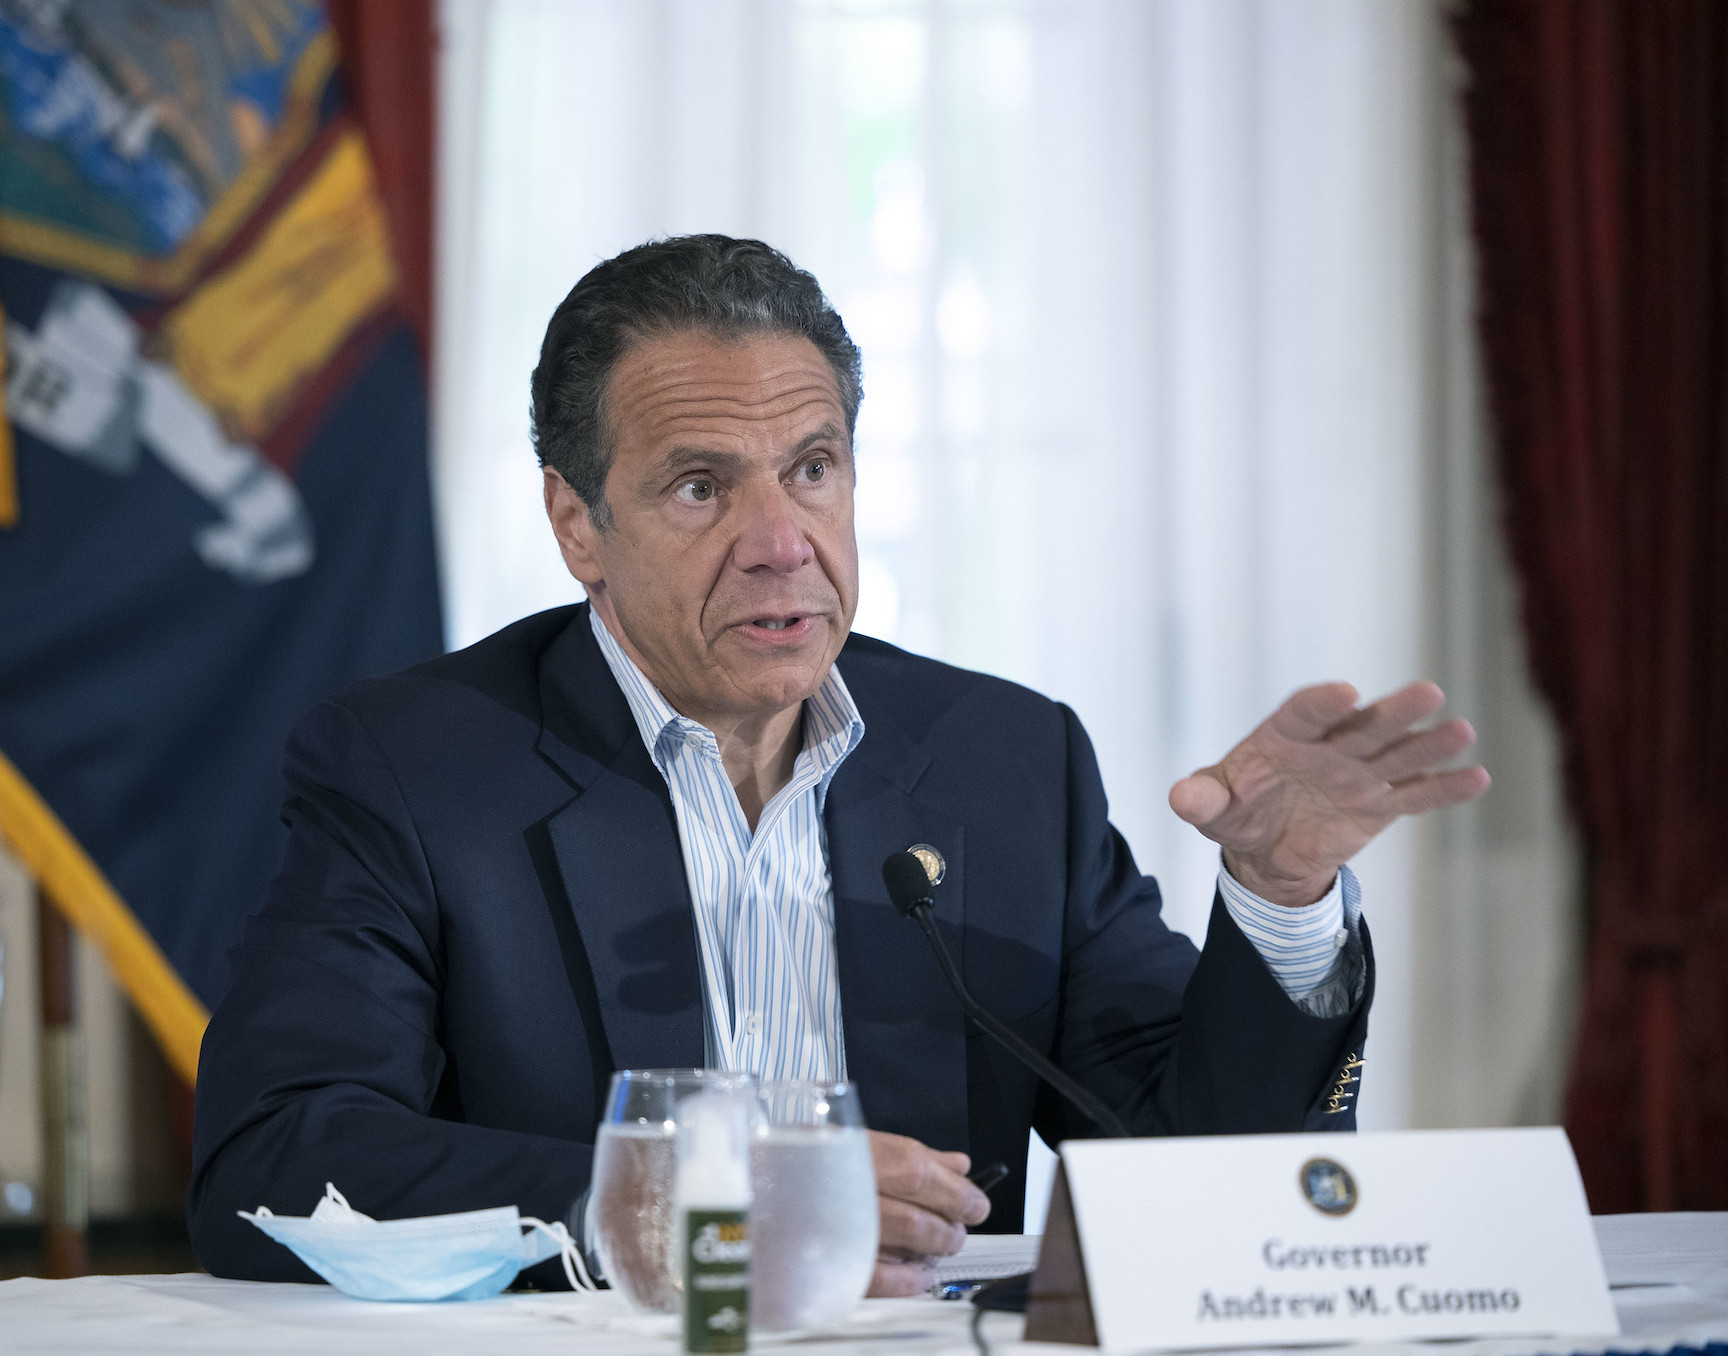 Gov. Andrew Cuomo provides a coronavirus update during a press conference Saturday at the executive mansion. (Photo by Mike Groll/Office of Gov. Andrew M. Cuomo)